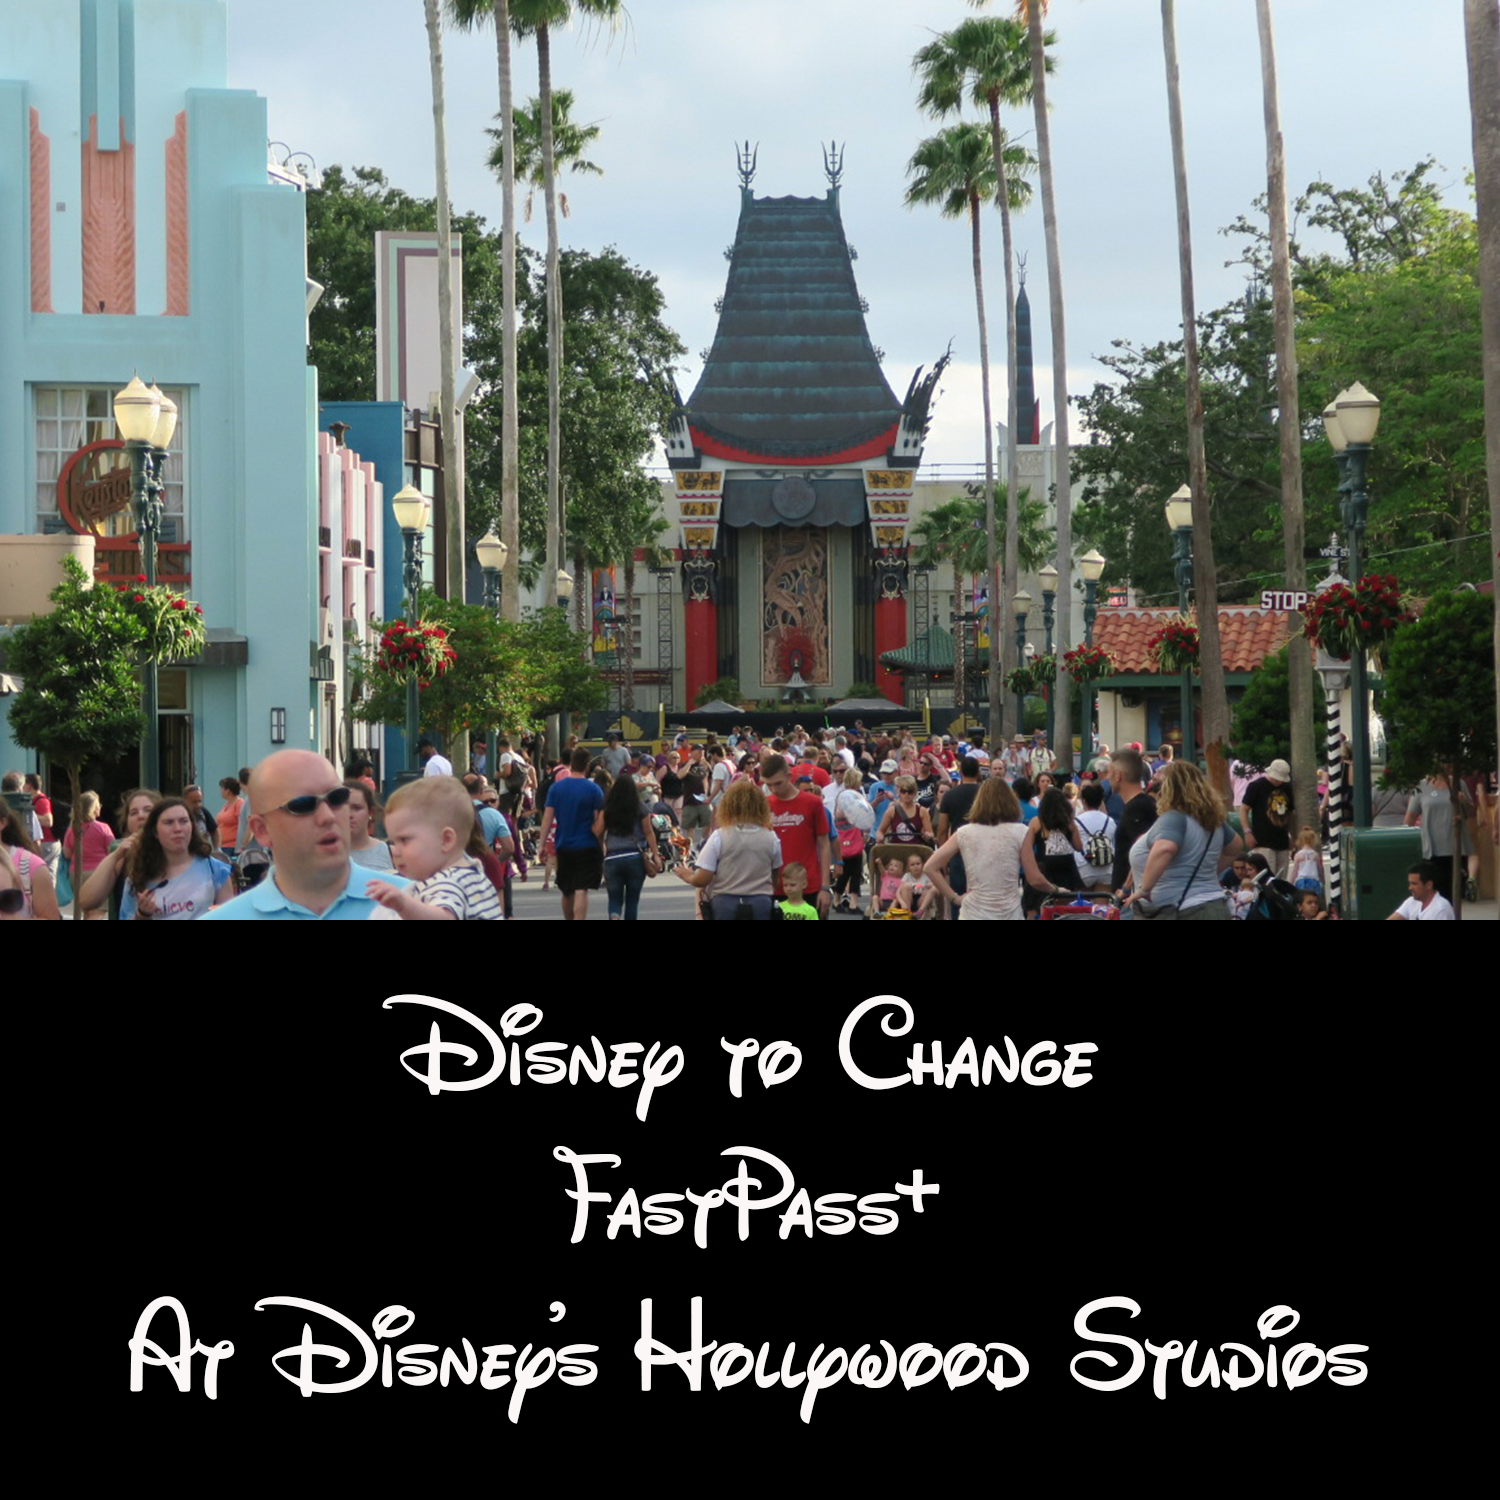 FastPass+ Teirs to Change at Disney’s Hollywood Studios